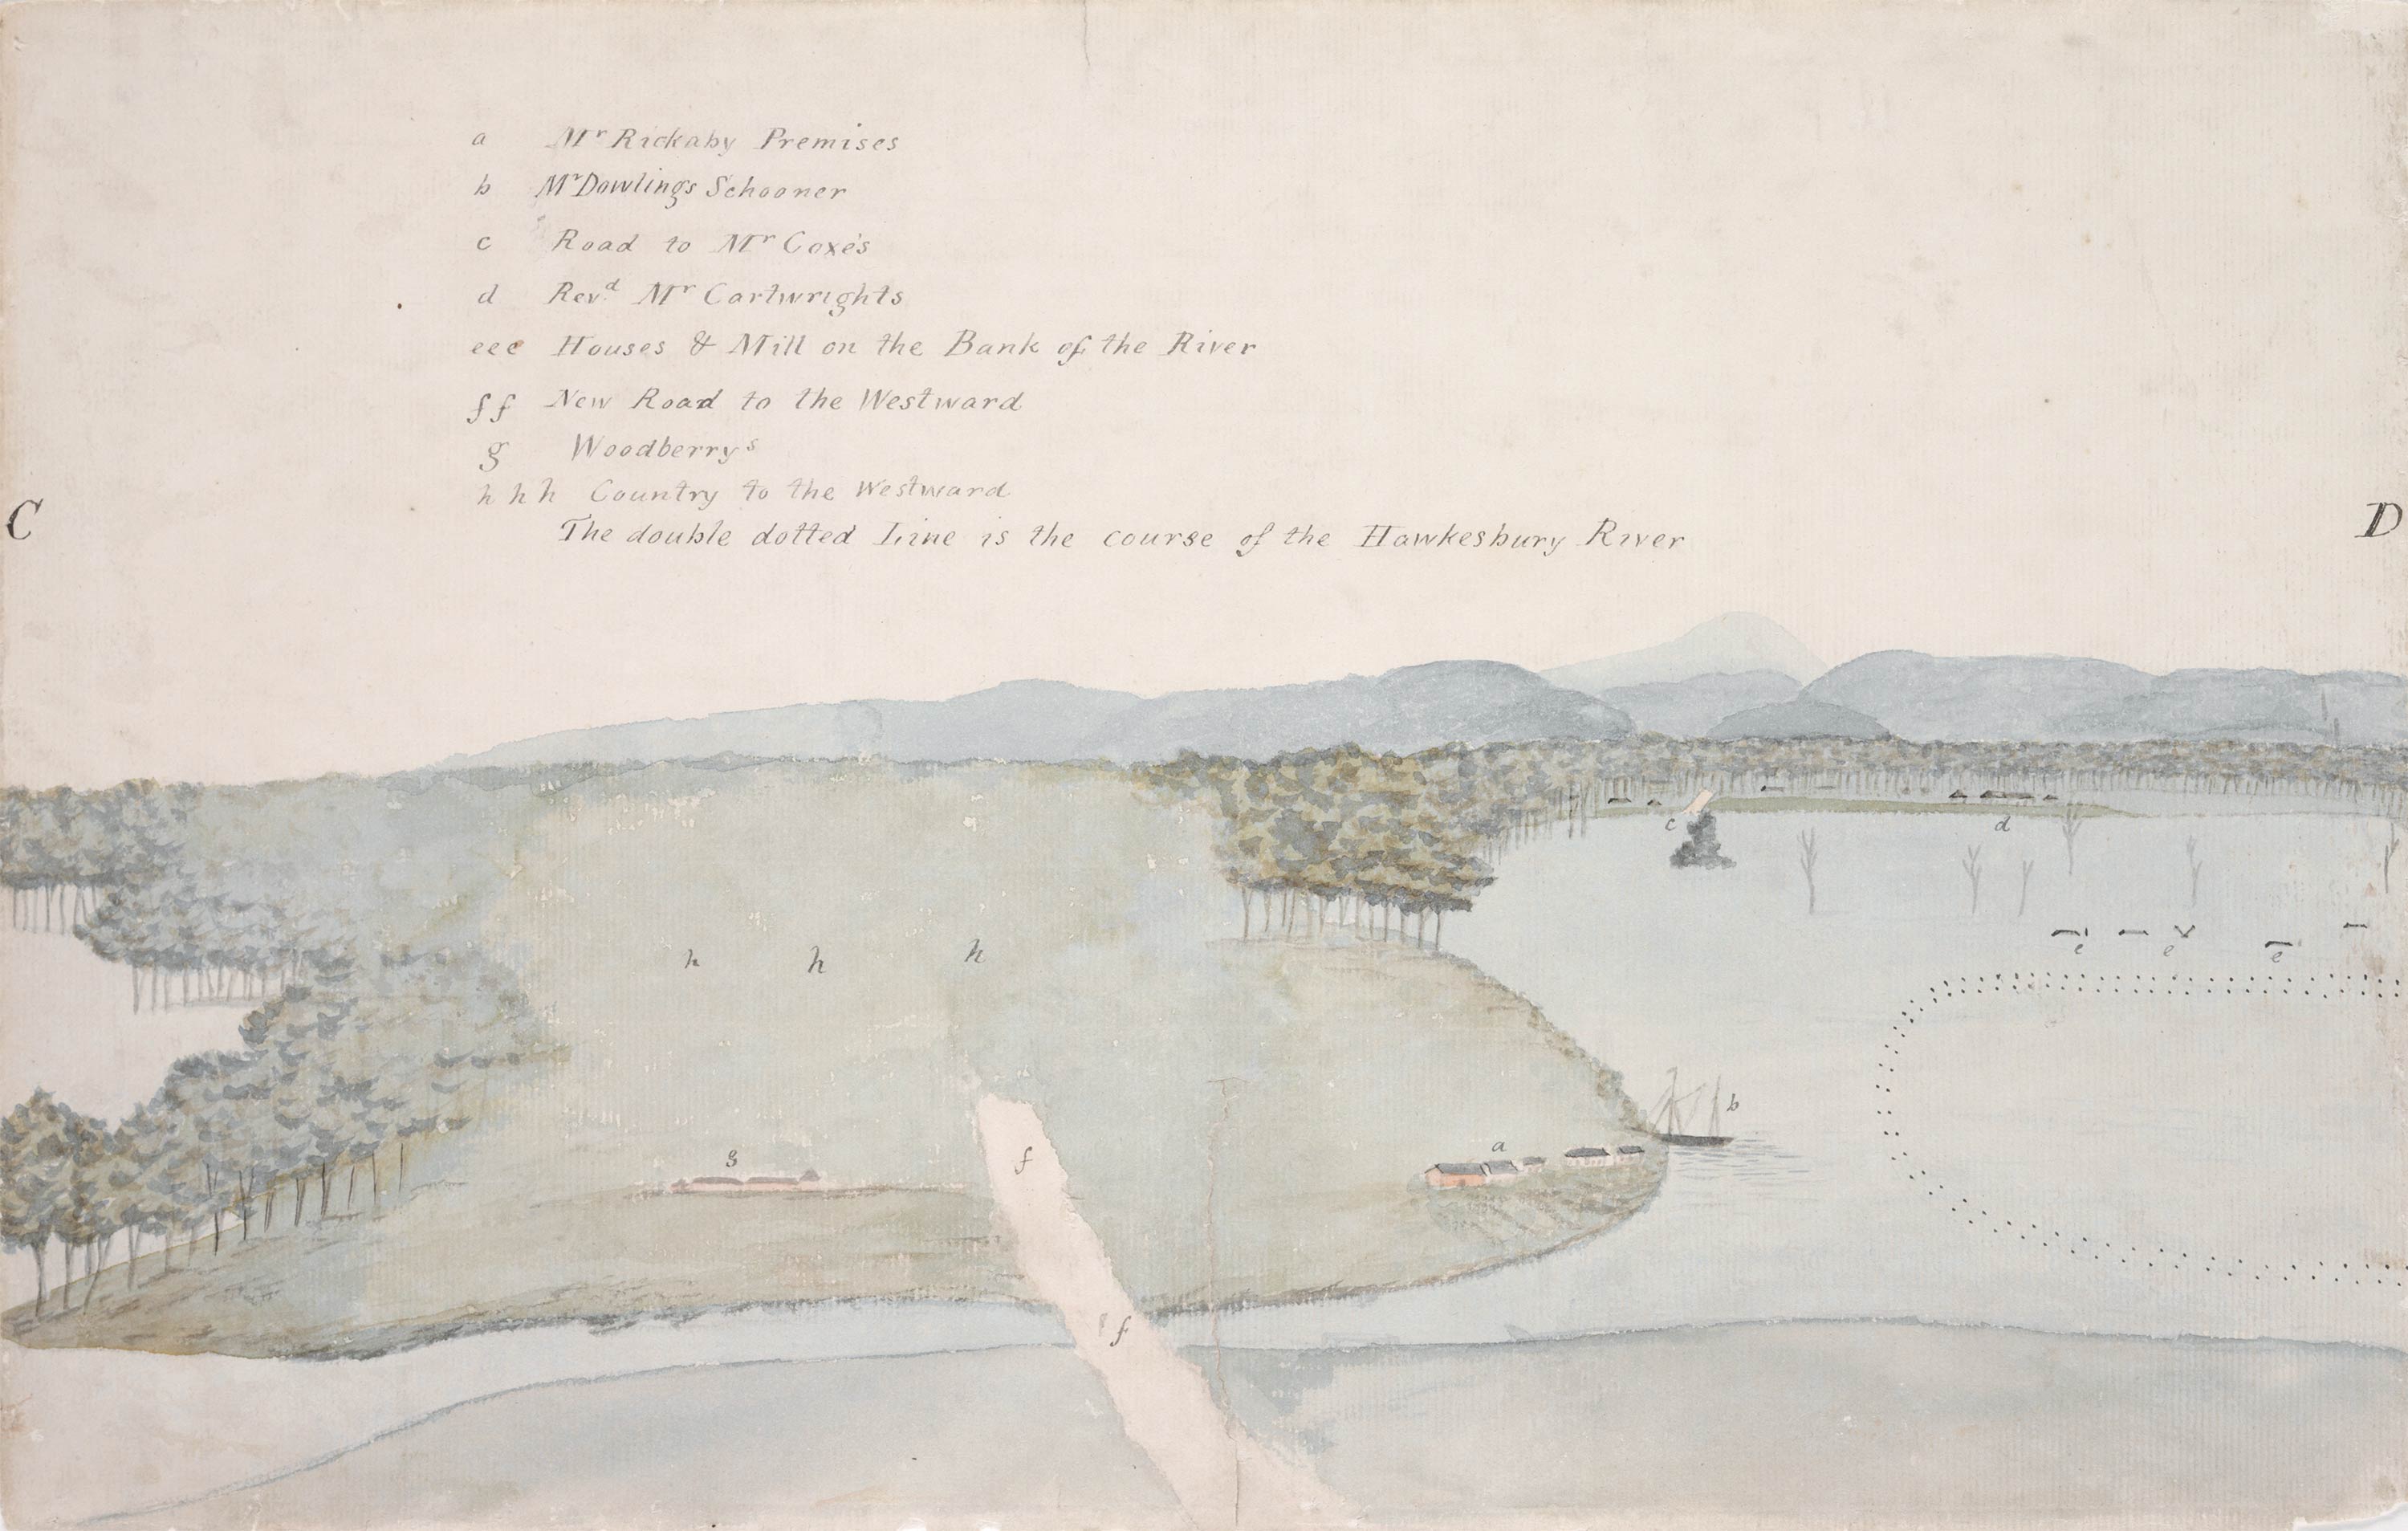 Sketch of the inundation in the neighborhood [sic] of Windsor taken on Sunday the 2nd of June 1816, Page 3